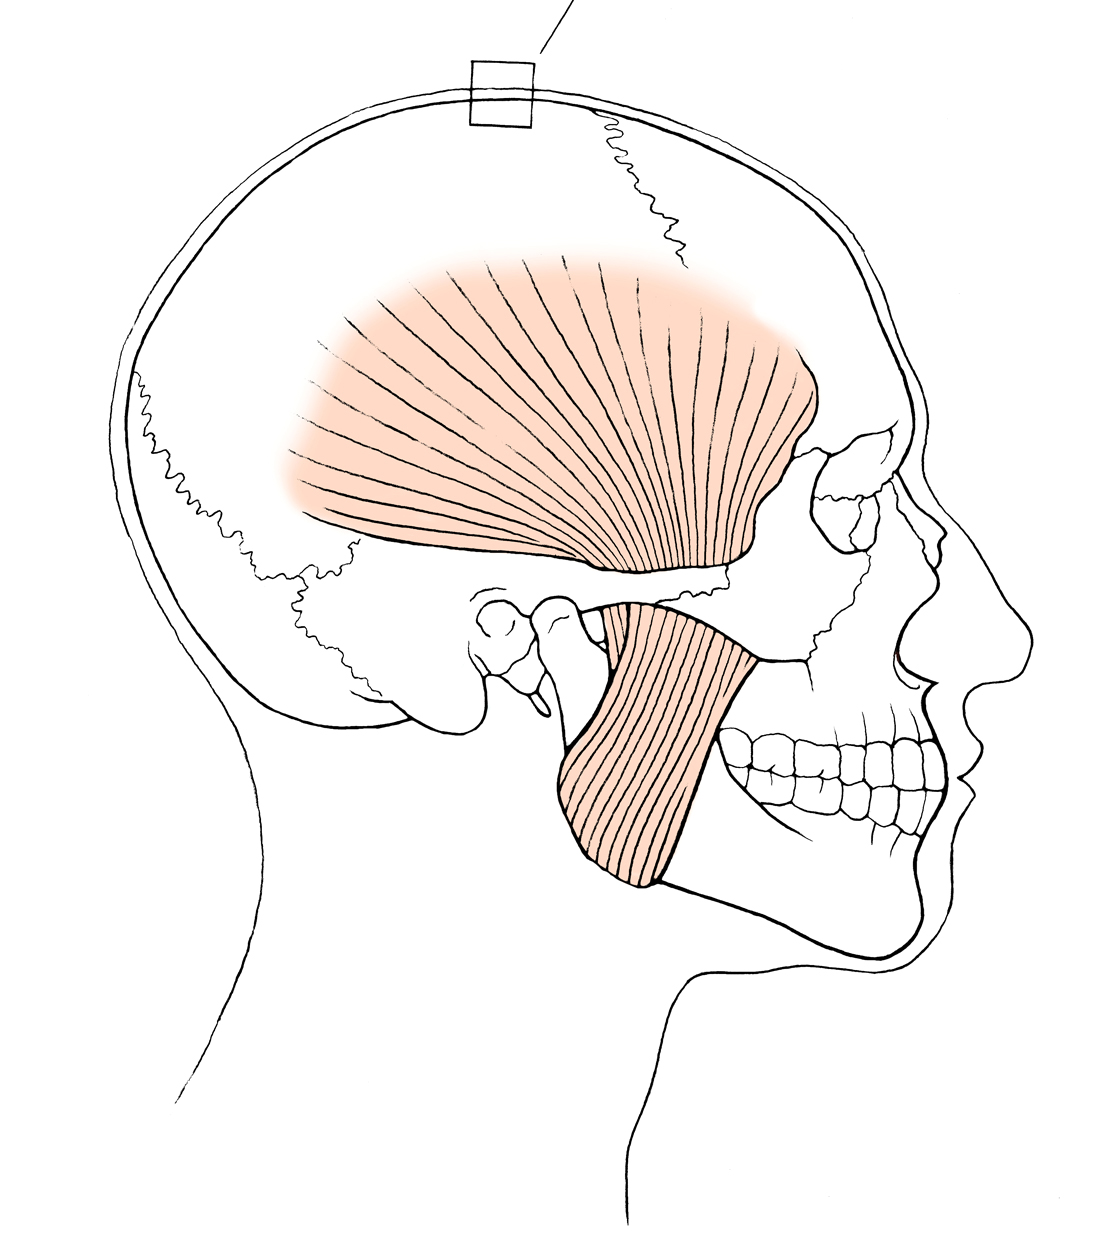 Illustration about pain in the head